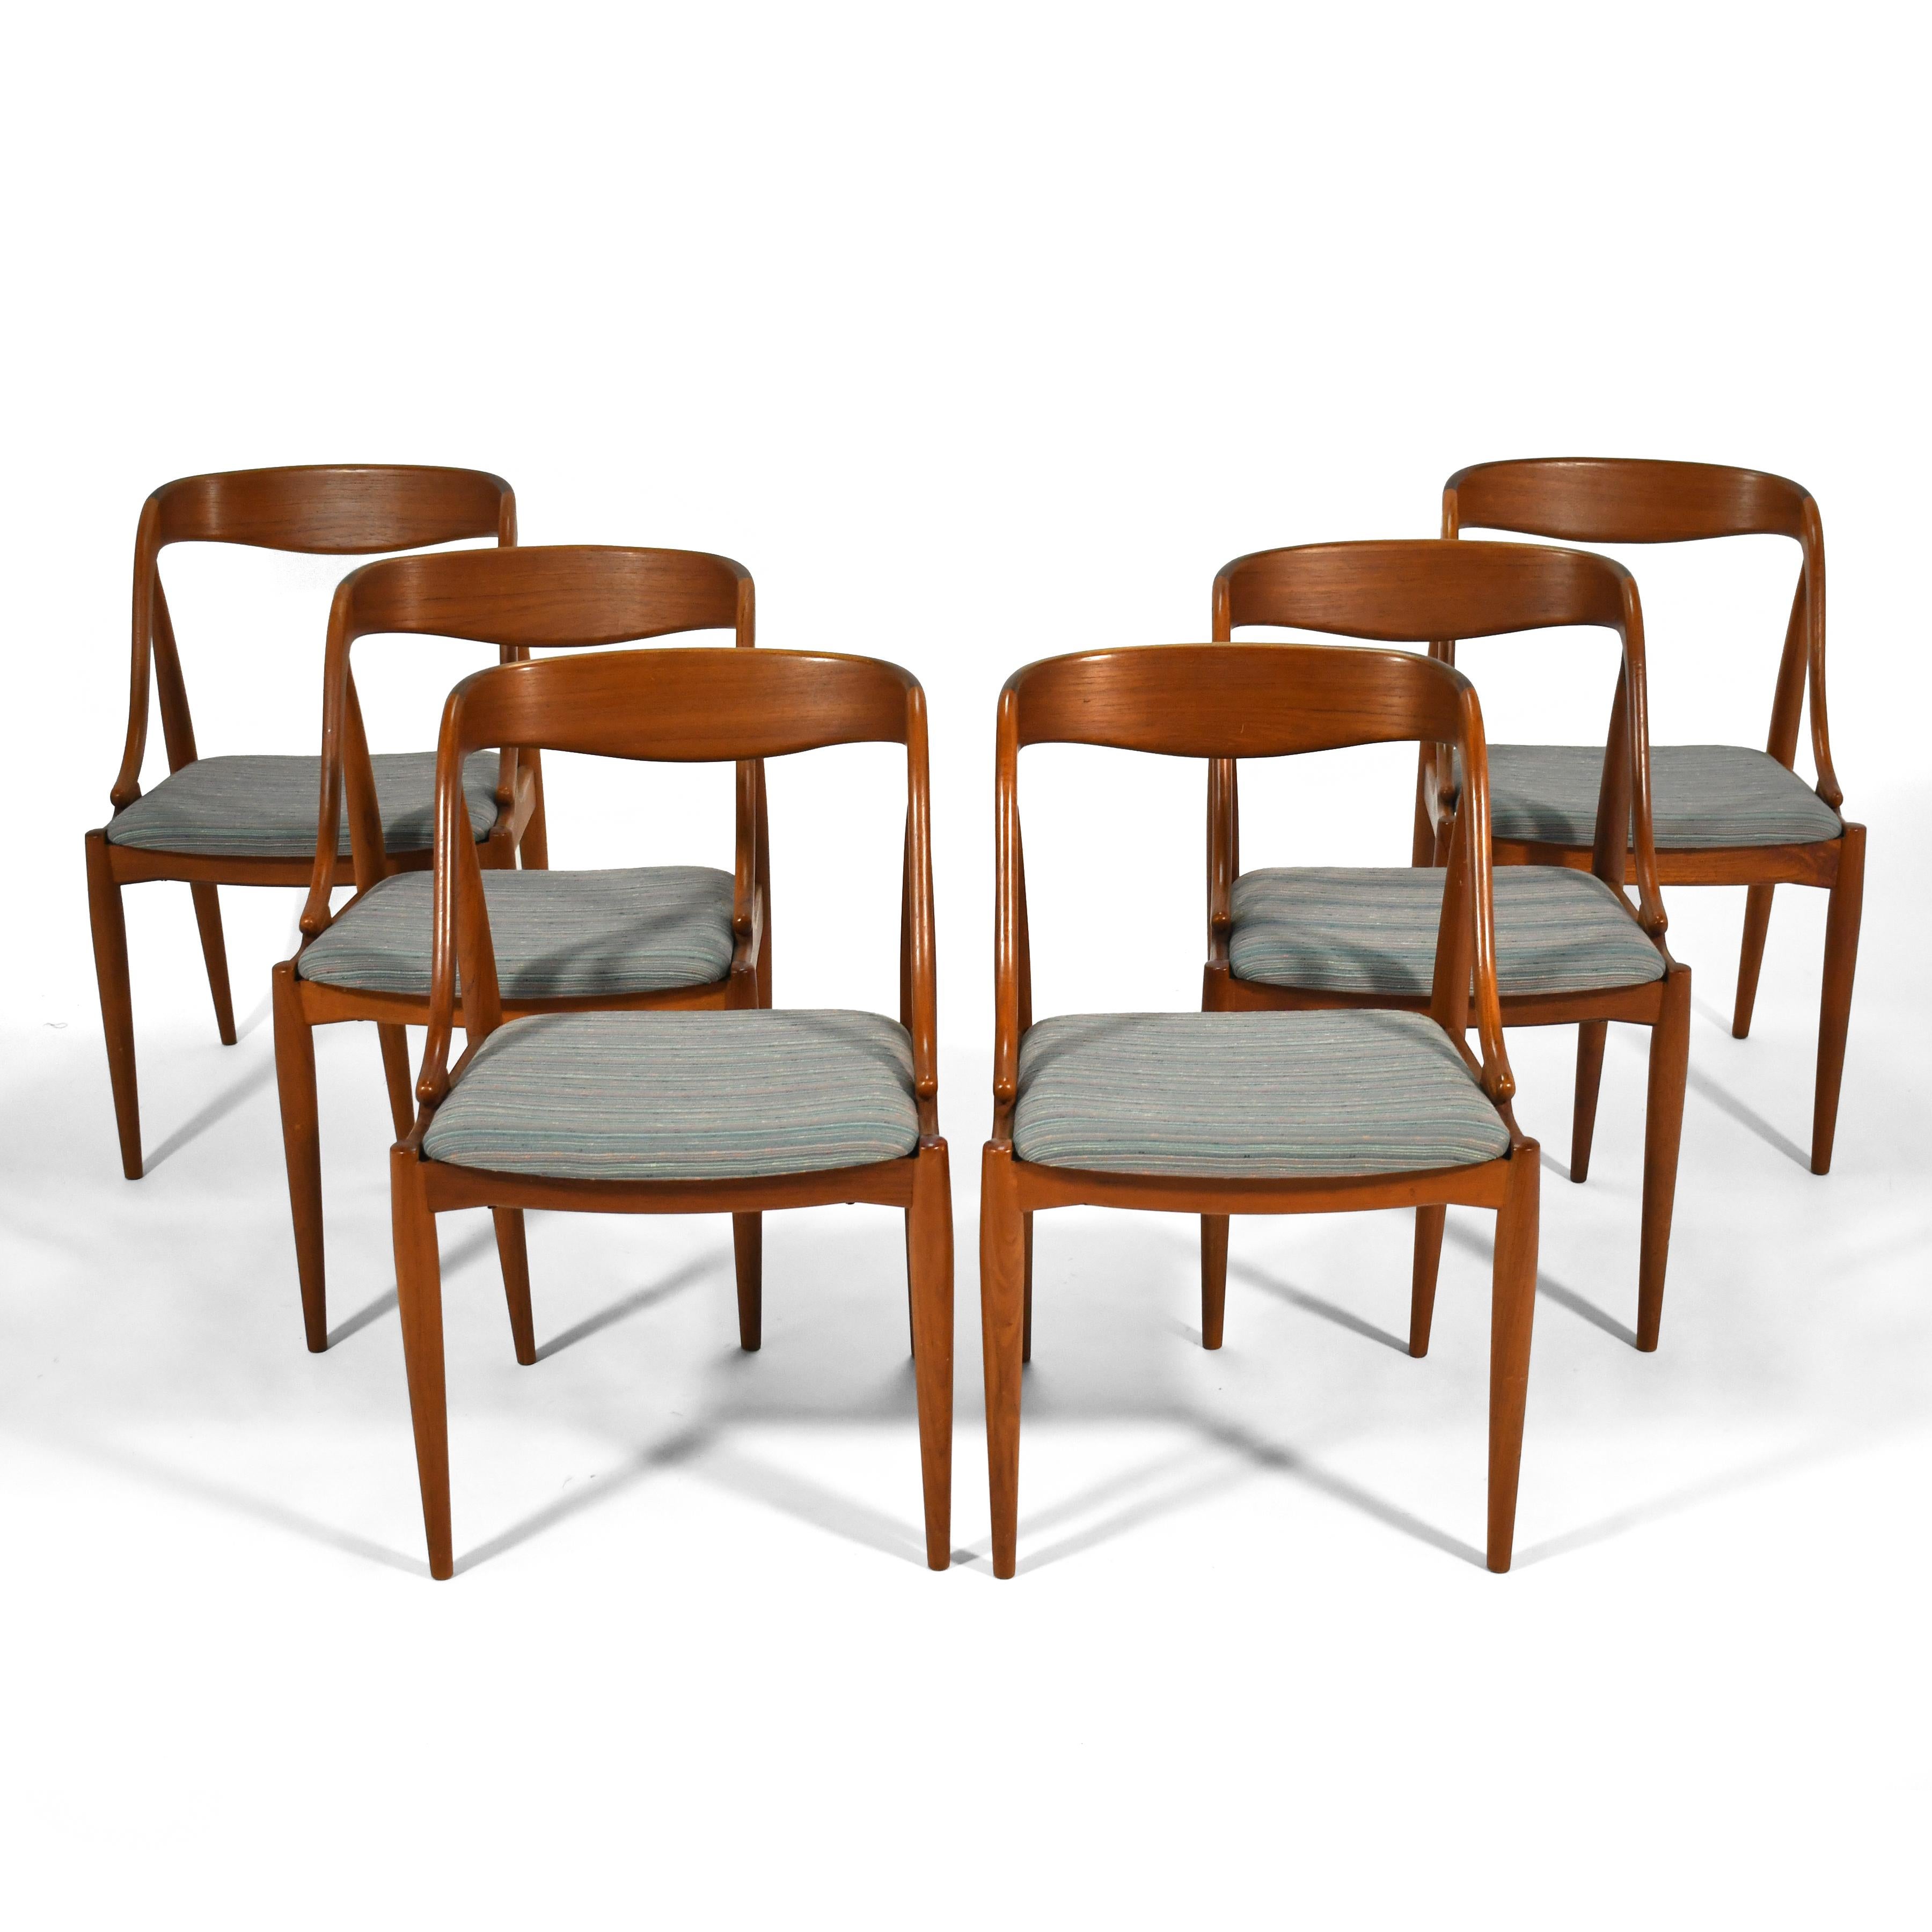 This set of six stately Johannes Andersen teak dining chairs by Uldum Mobelfabrik, have sexy sculptural lines and light, tapered legs. They as comfortable as they are beautiful.

Measures: 30